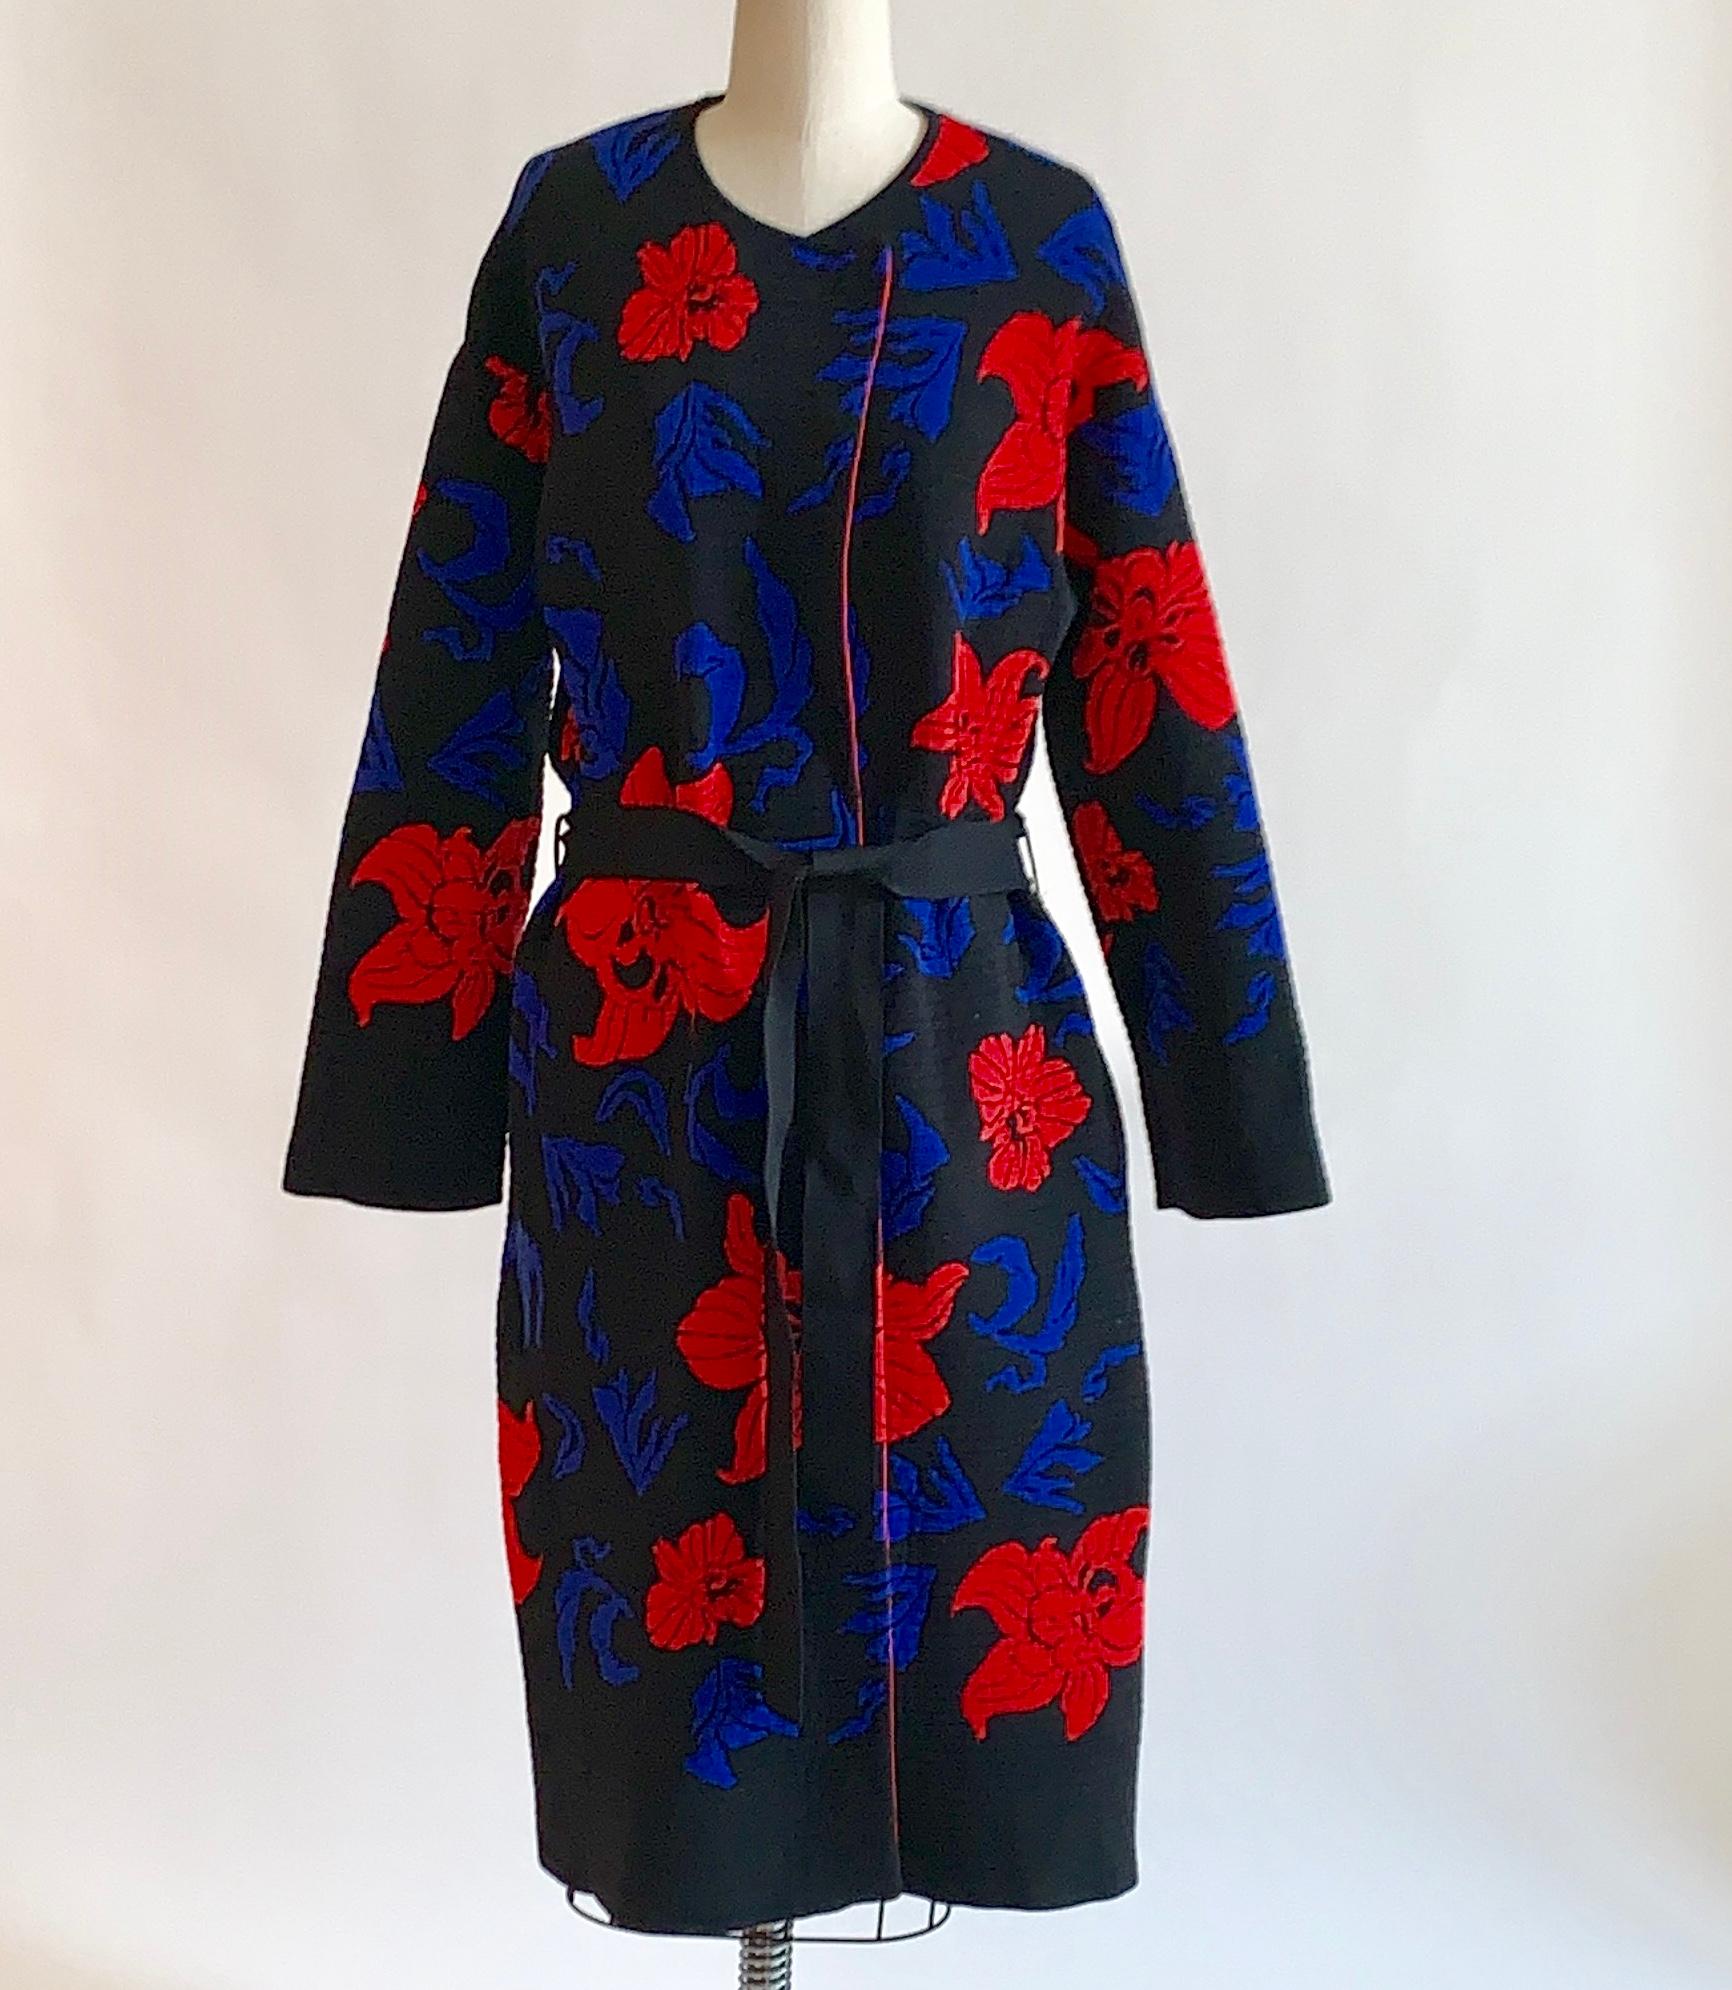 Emilio Pucci black rib knit mid-weight sweater coat with red and blue flower print throughout. Fastens with two snaps at neck and tie belt at waist. Could also be styled for indoor wear as a duster cardigan. 

100% nylon/polyamide.

Made in Italy.